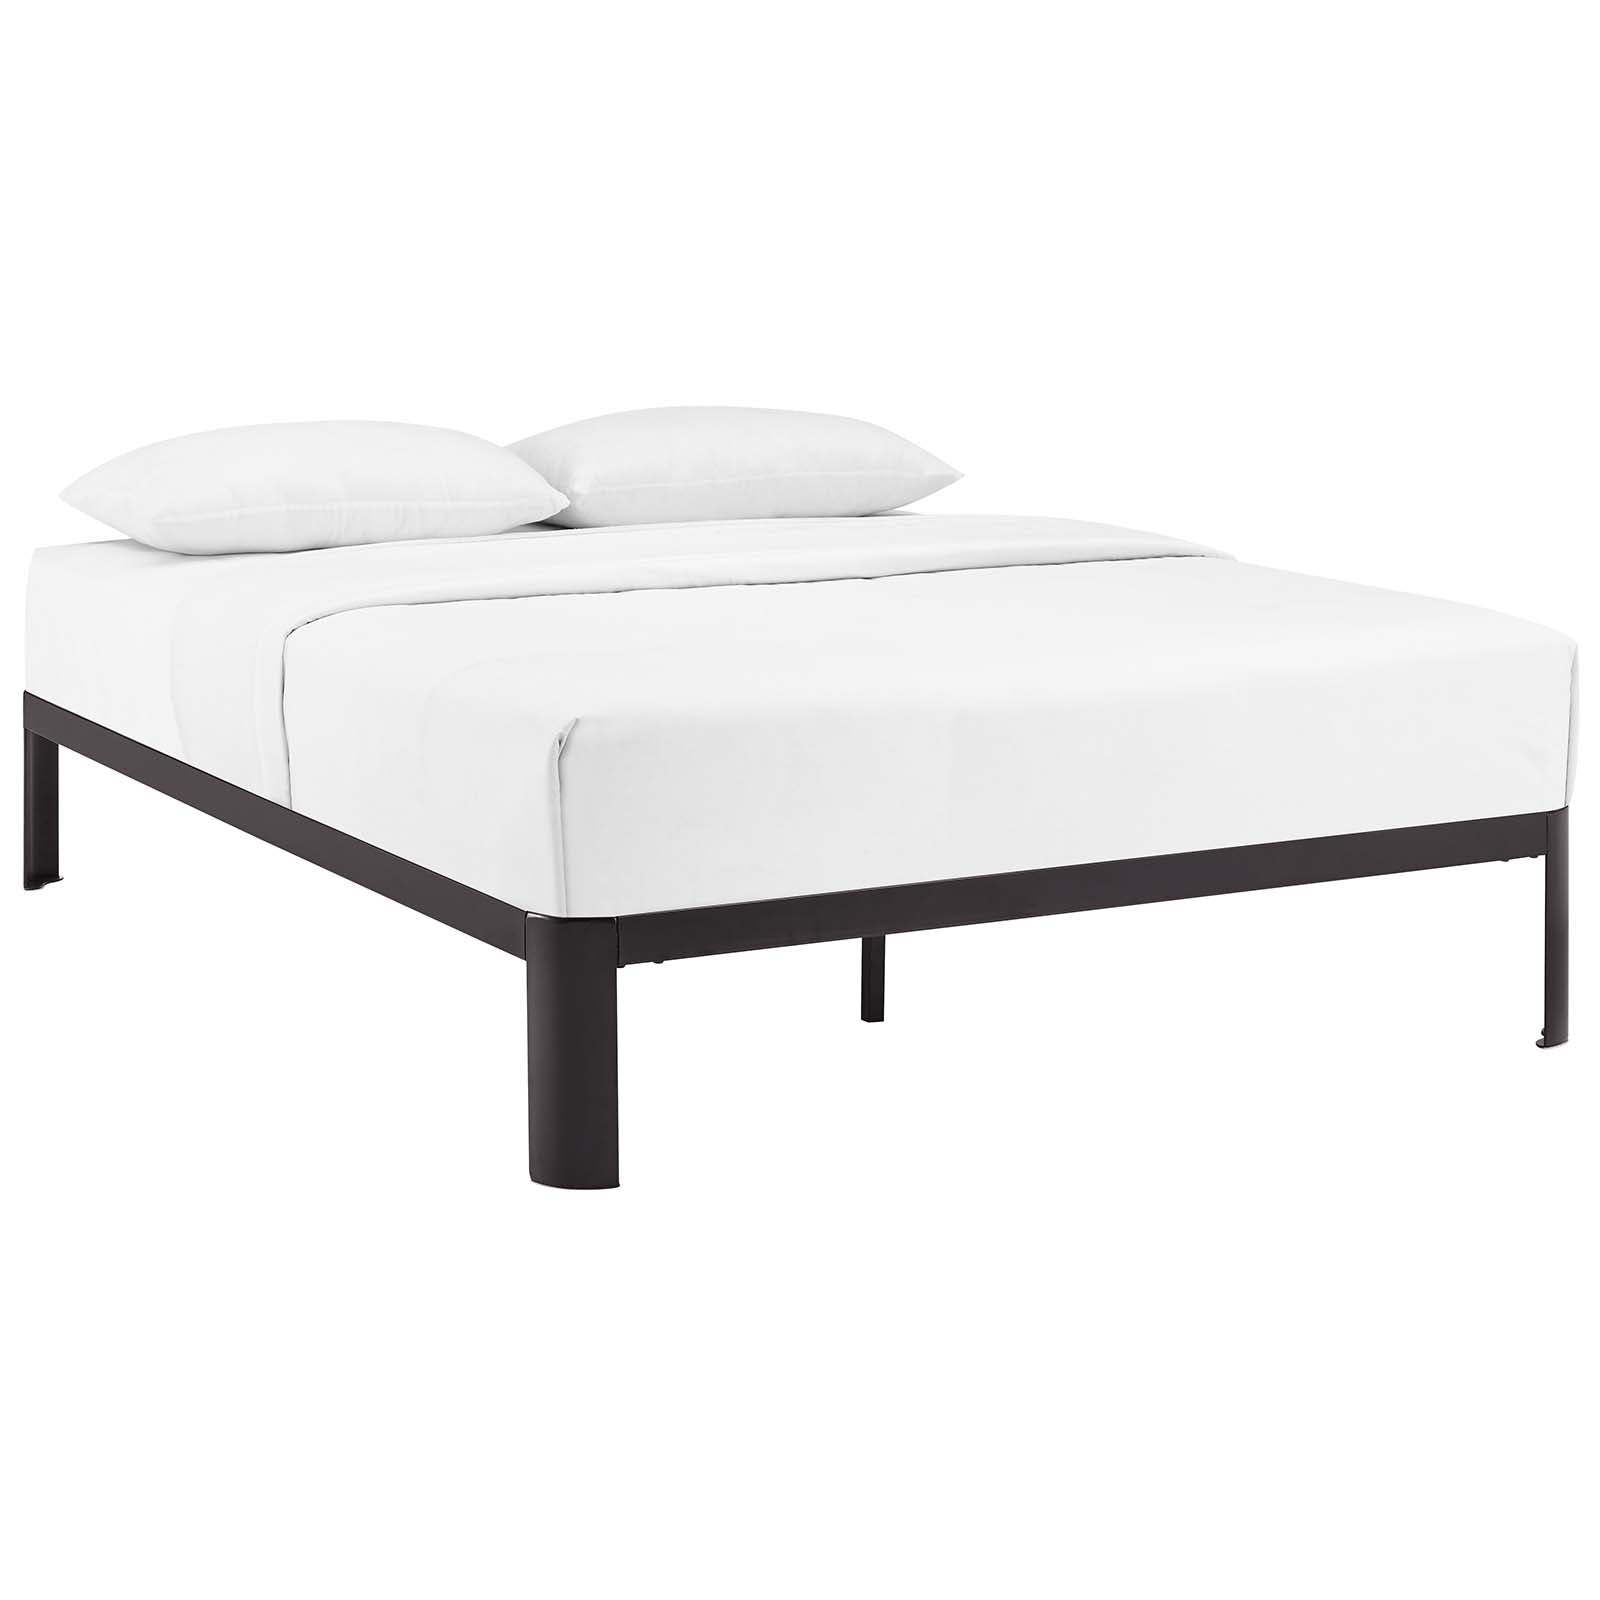 Modway Beds - Corinne Full Bed Frame Brown